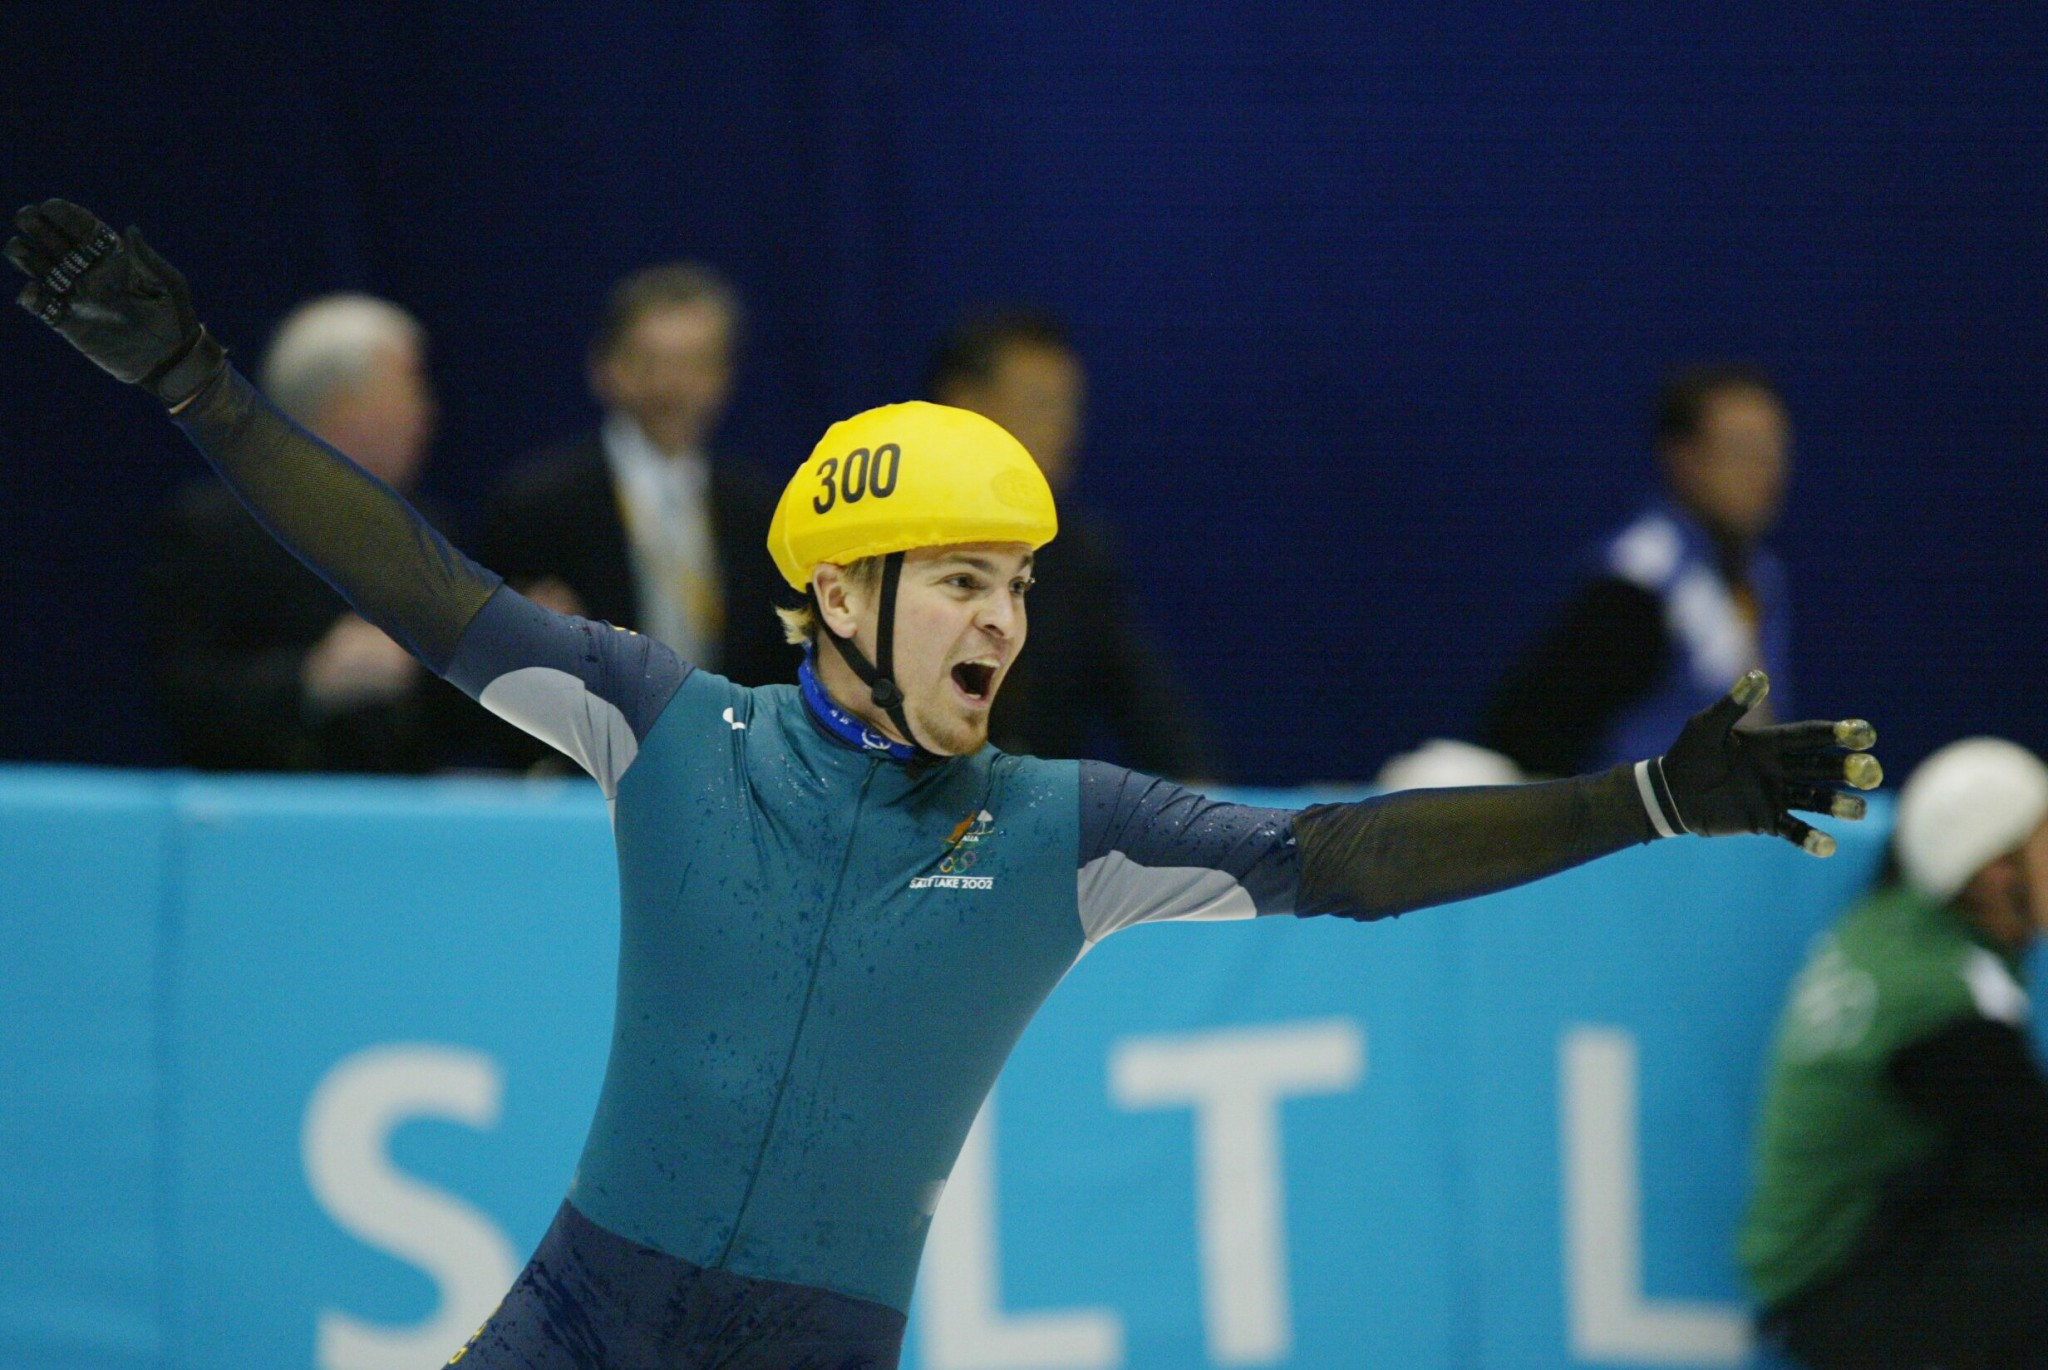 Ian Chesterman was Chef de Mission of the Australian team at Salt Lake City 2002 where the country won its first gold medals in the Winter Olympics, including short track speed skater Steven Bradbury ©Getty Images